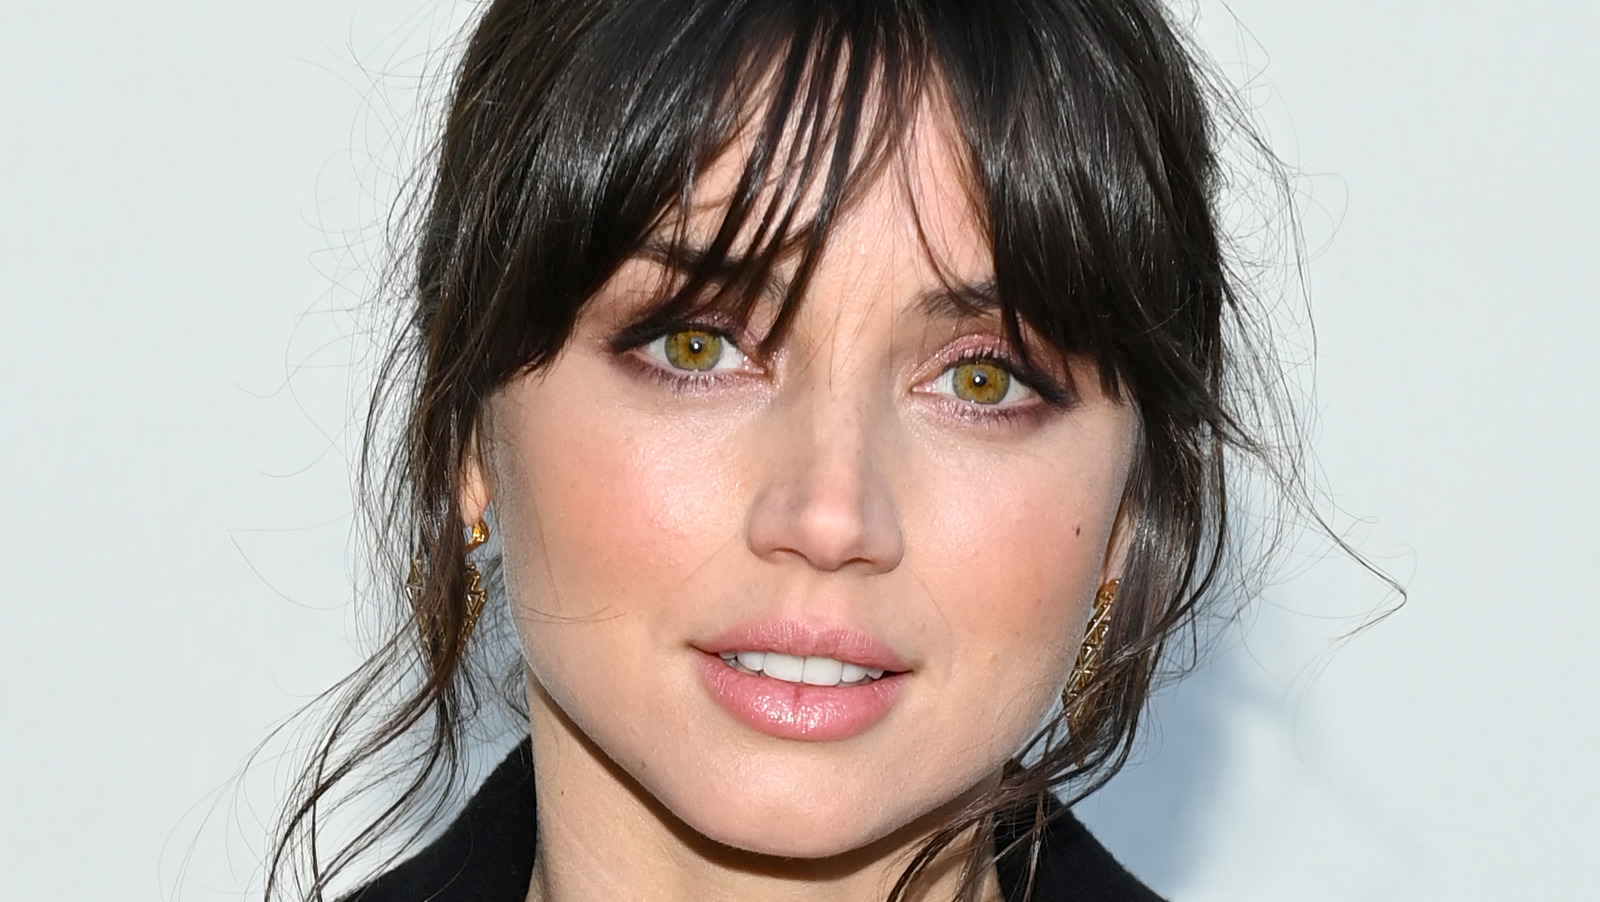 There's no need for a female Bond, according to Ana de Armas